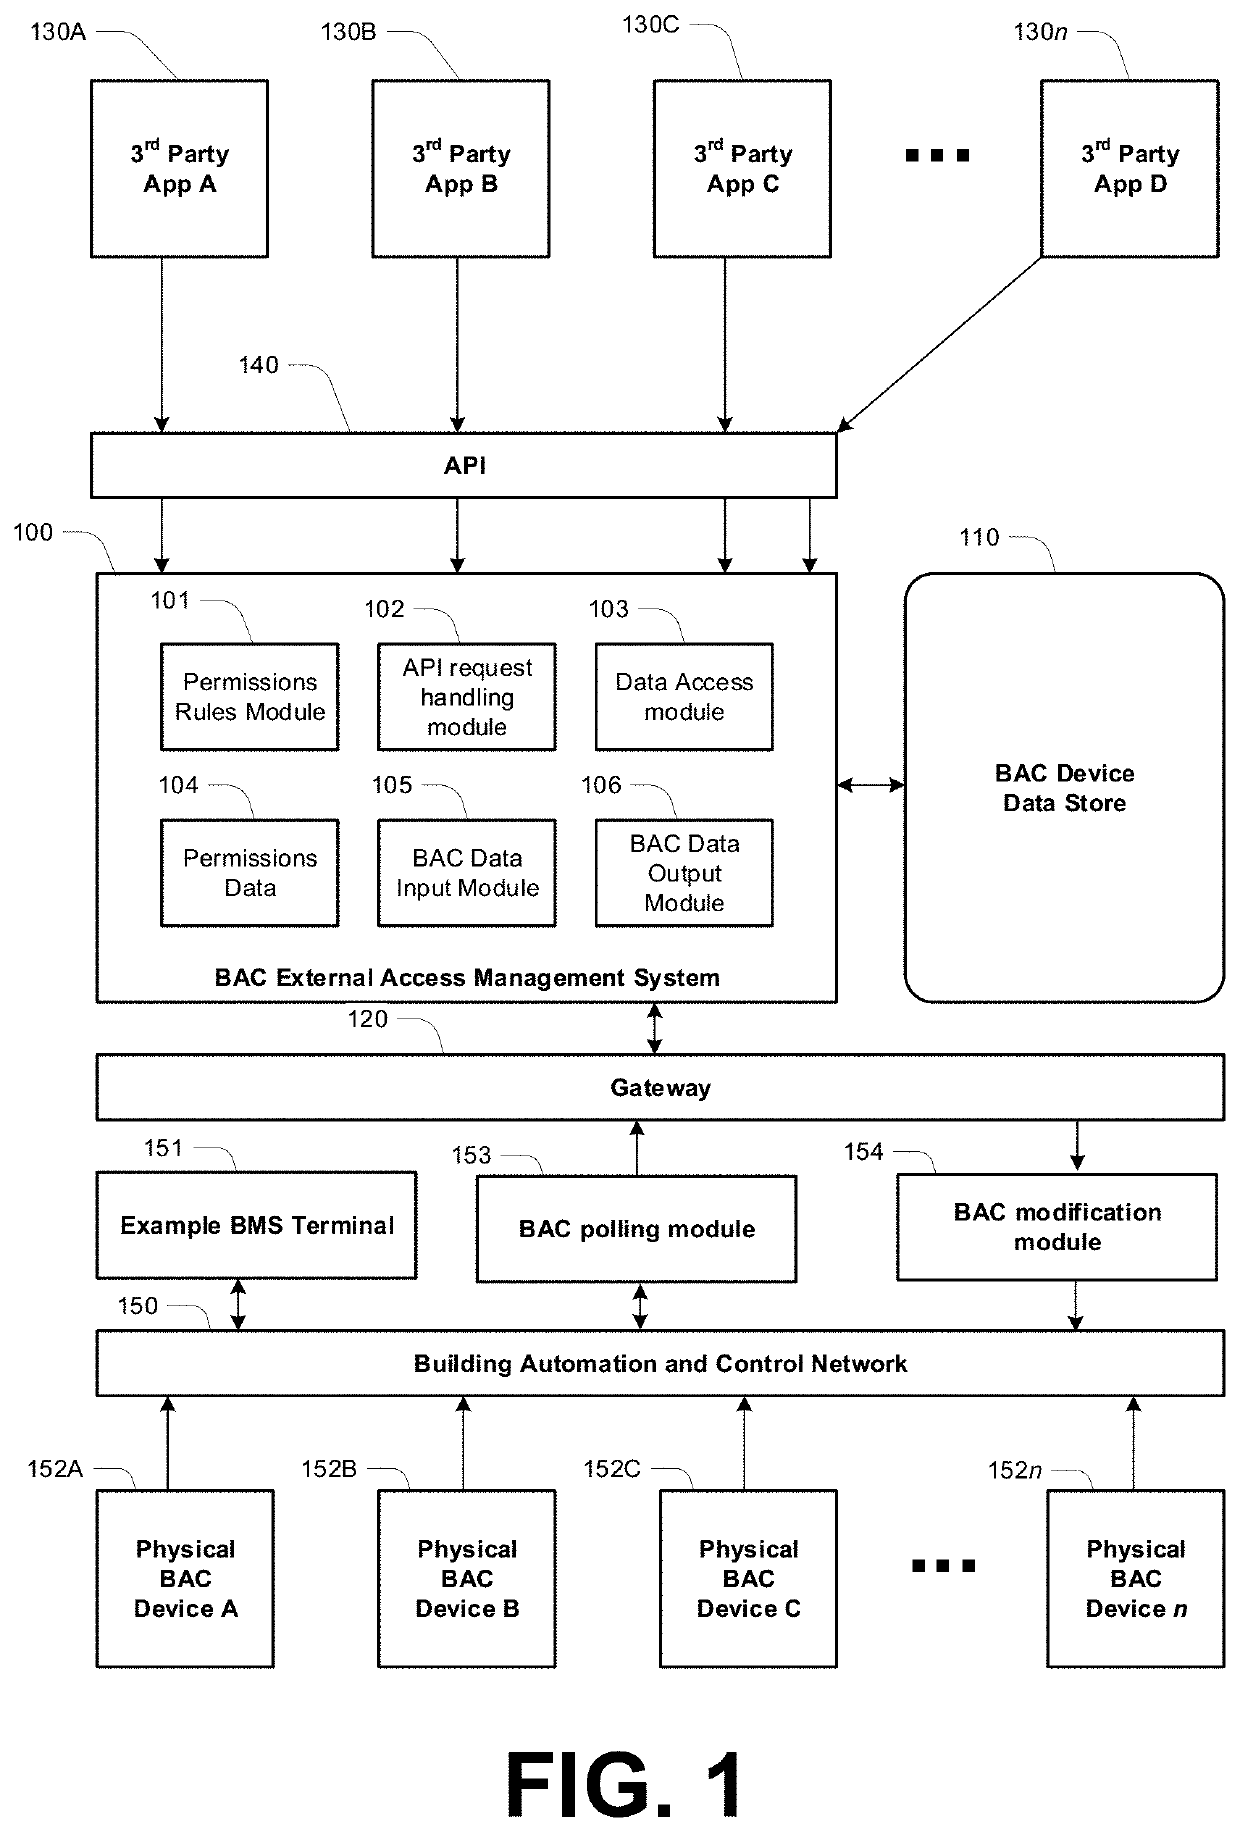 Systems configured to enable isolated client device interaction with building automation and control (BAC) networks, including third-party application access framework